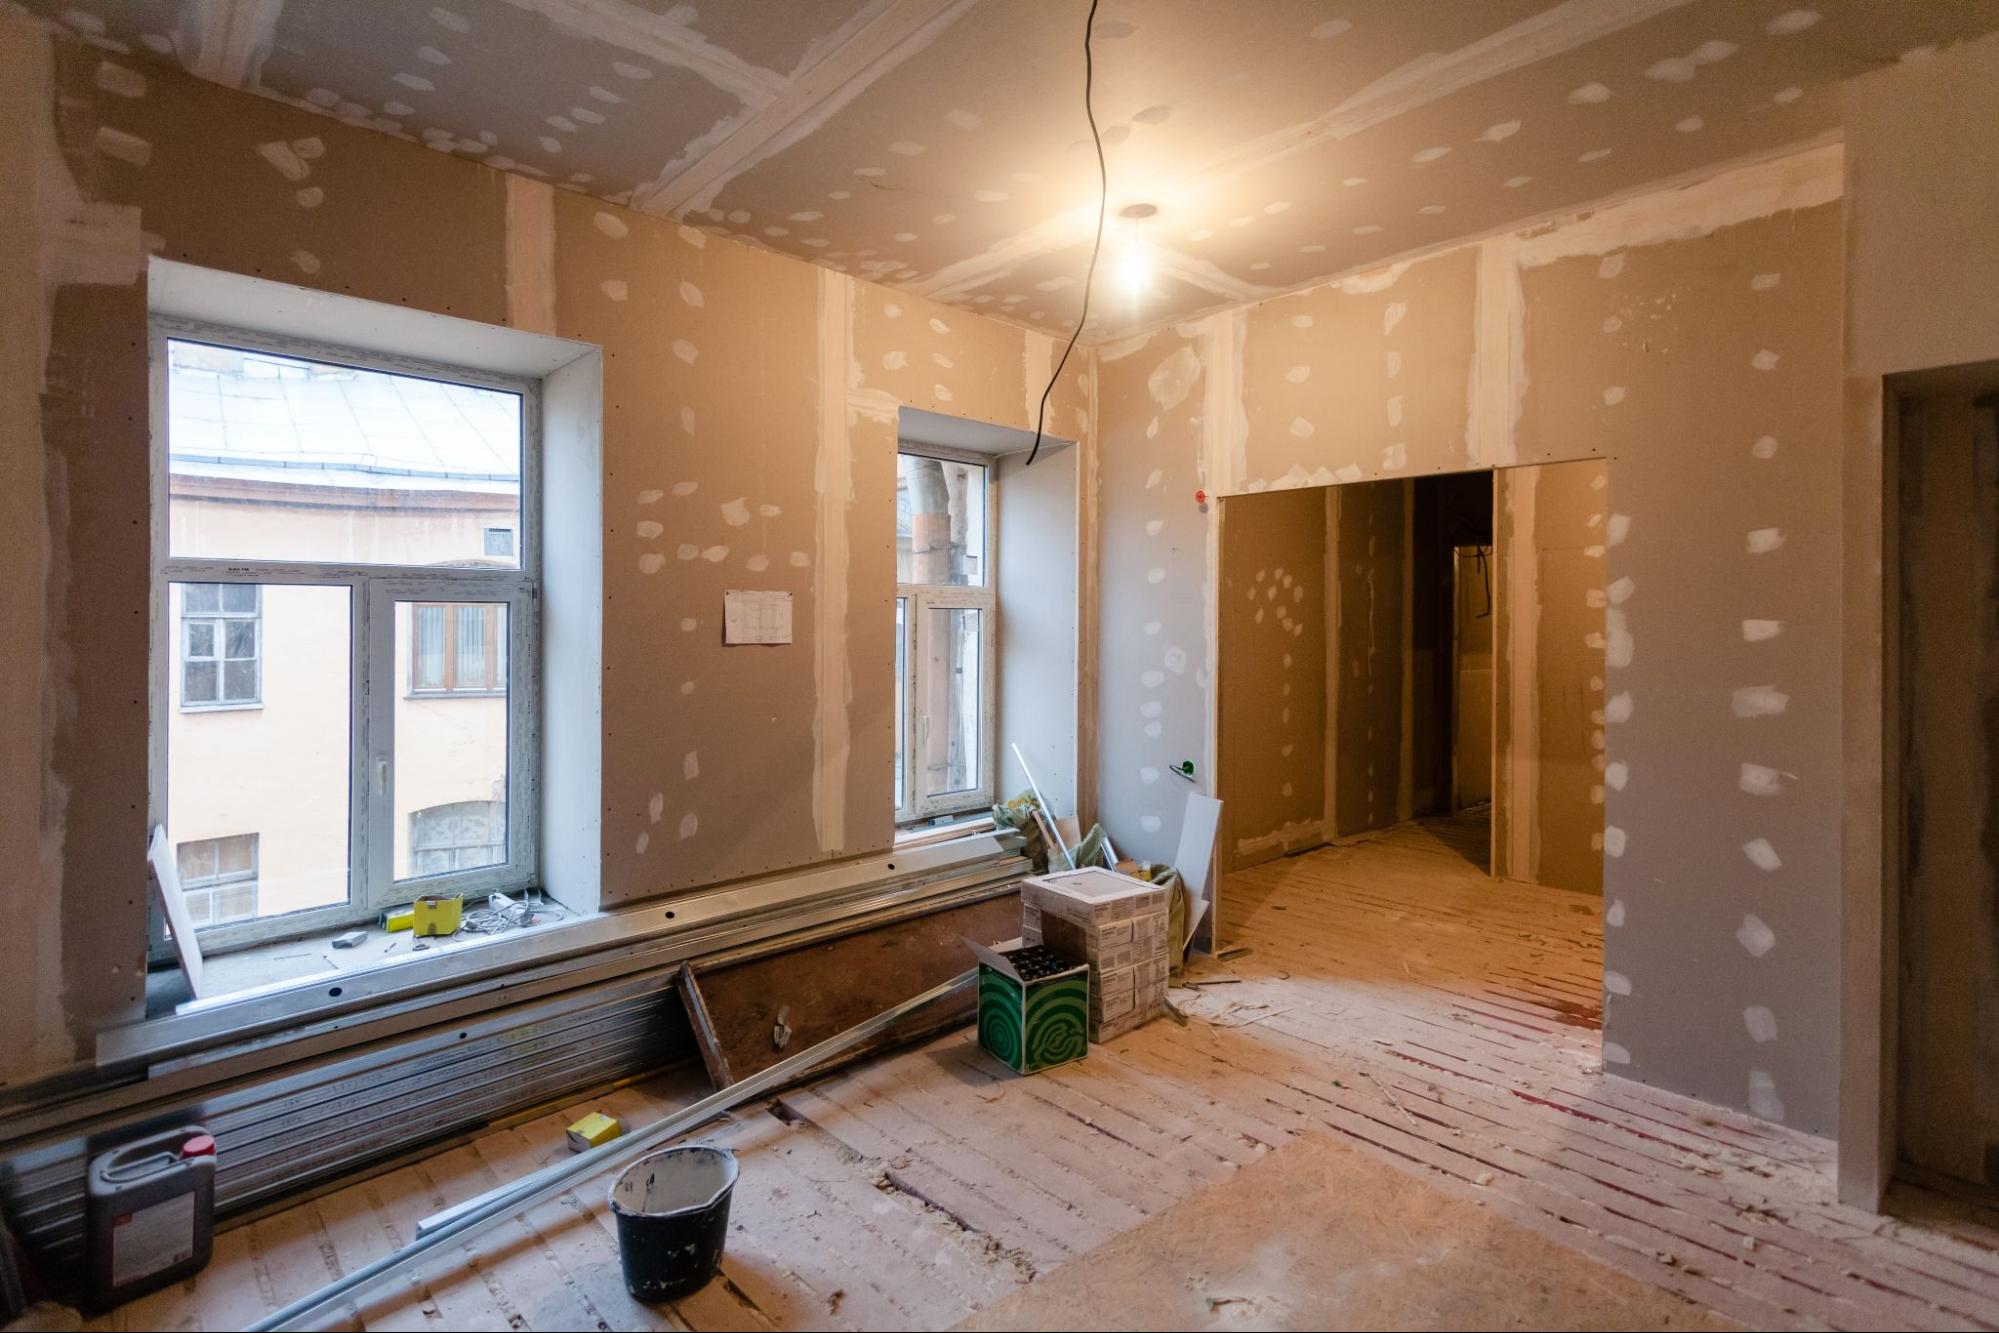 A room is being remodeled with drywall and plaster.